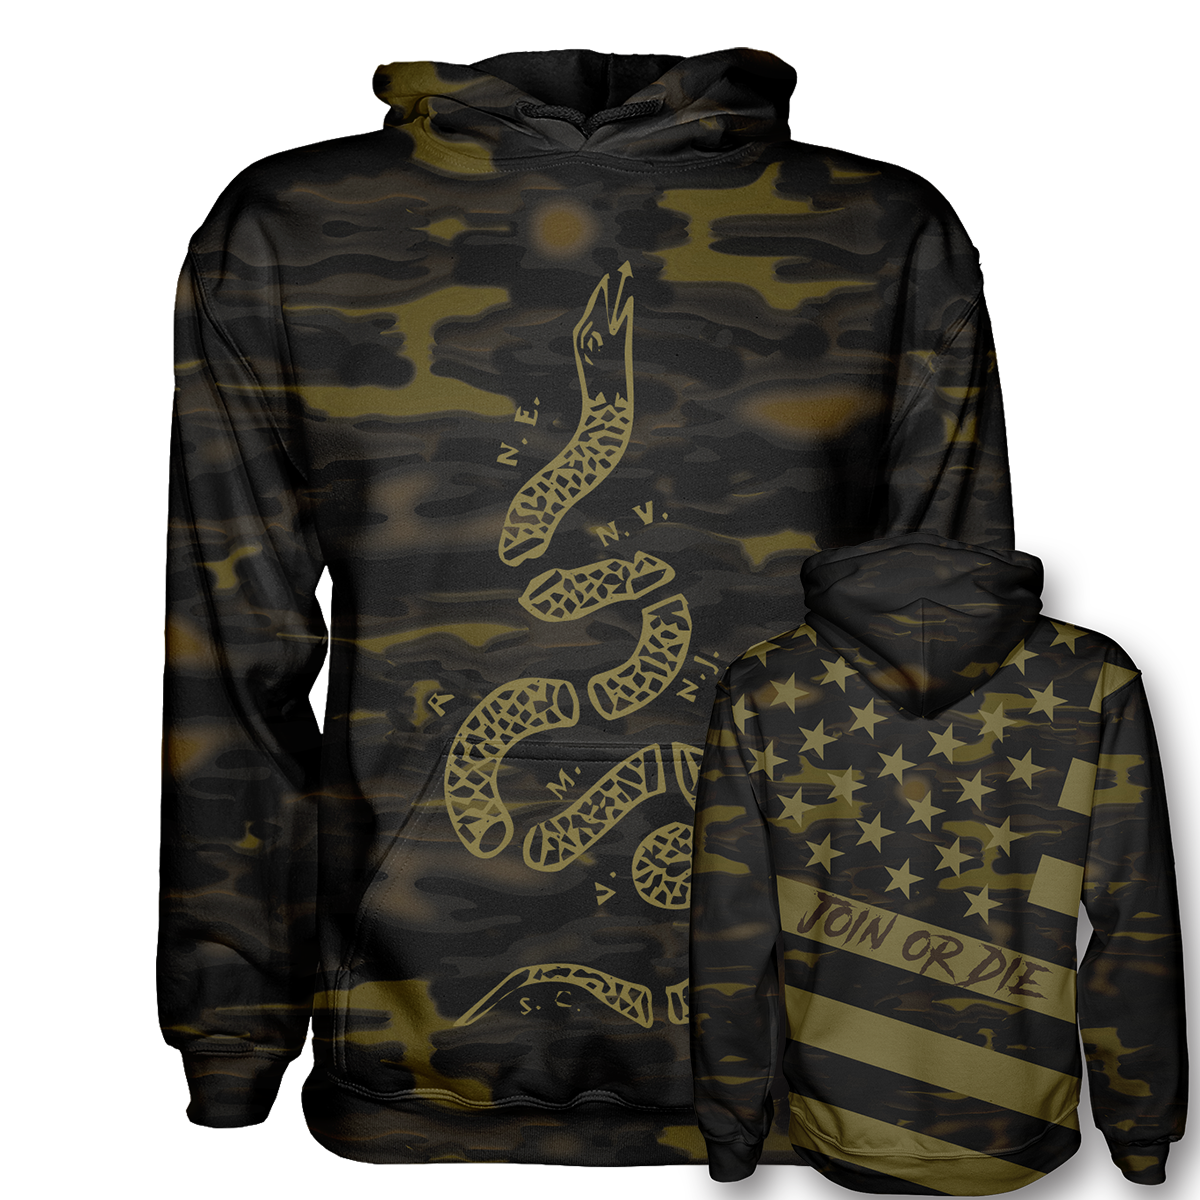 Join or Die Gold Camo Hoodie